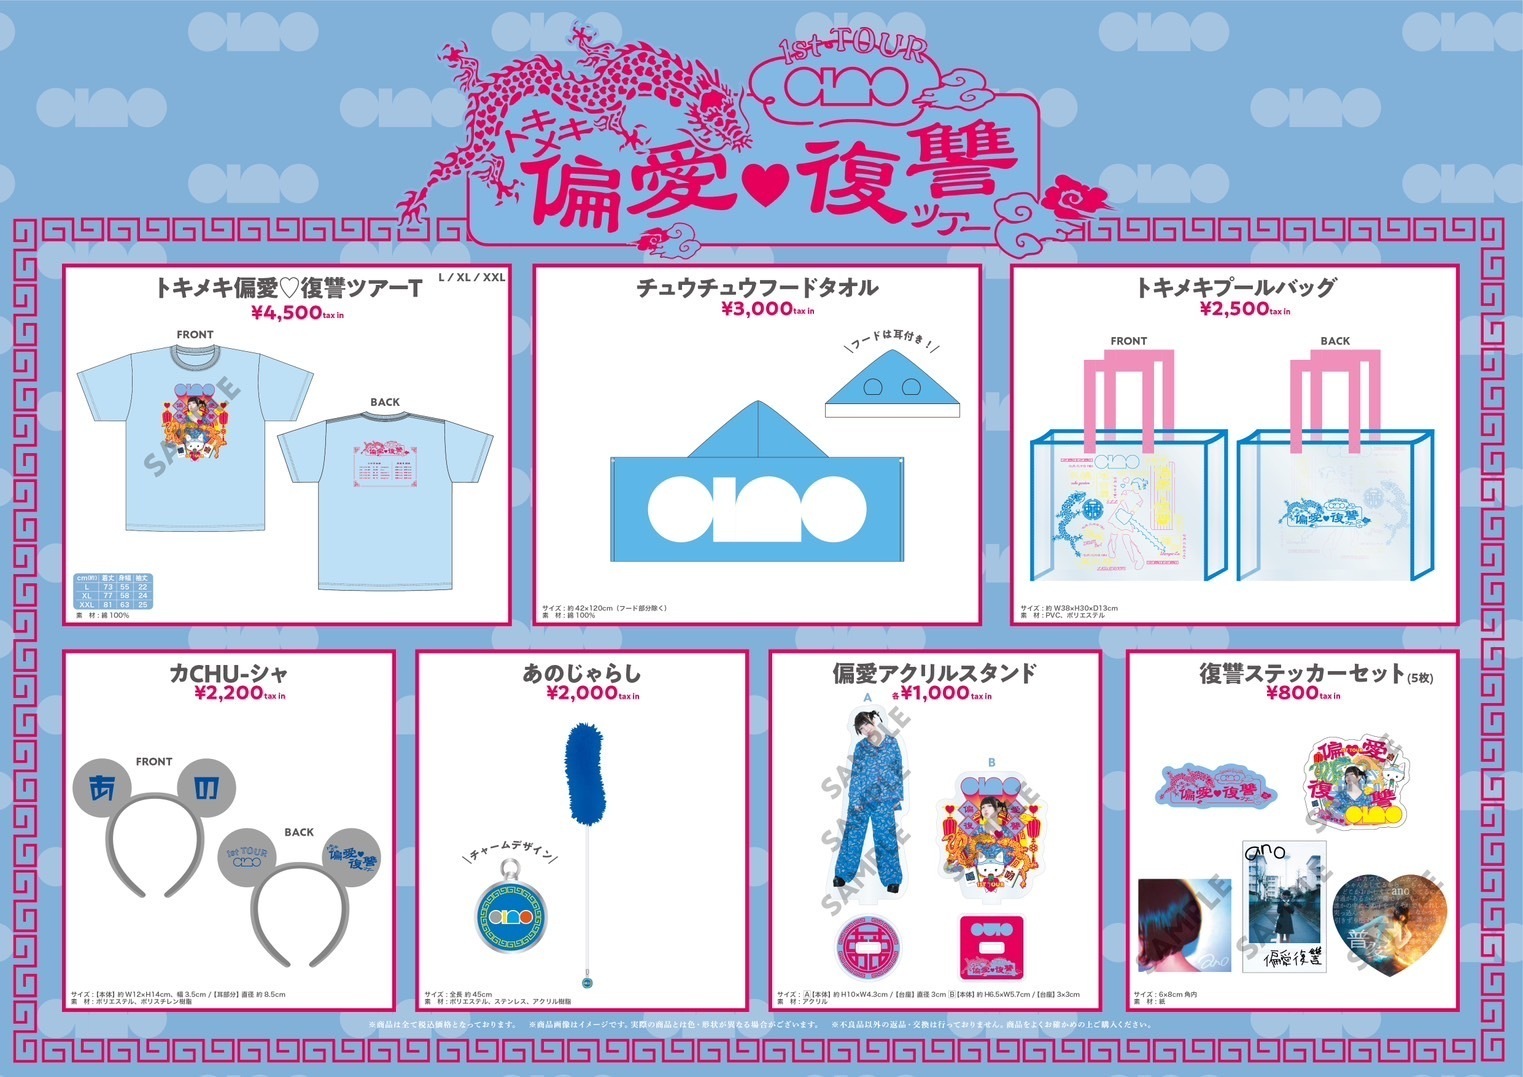 GOODS】ano 公式グッズ通販開始のお知らせ | ANO OFFICIAL SITE